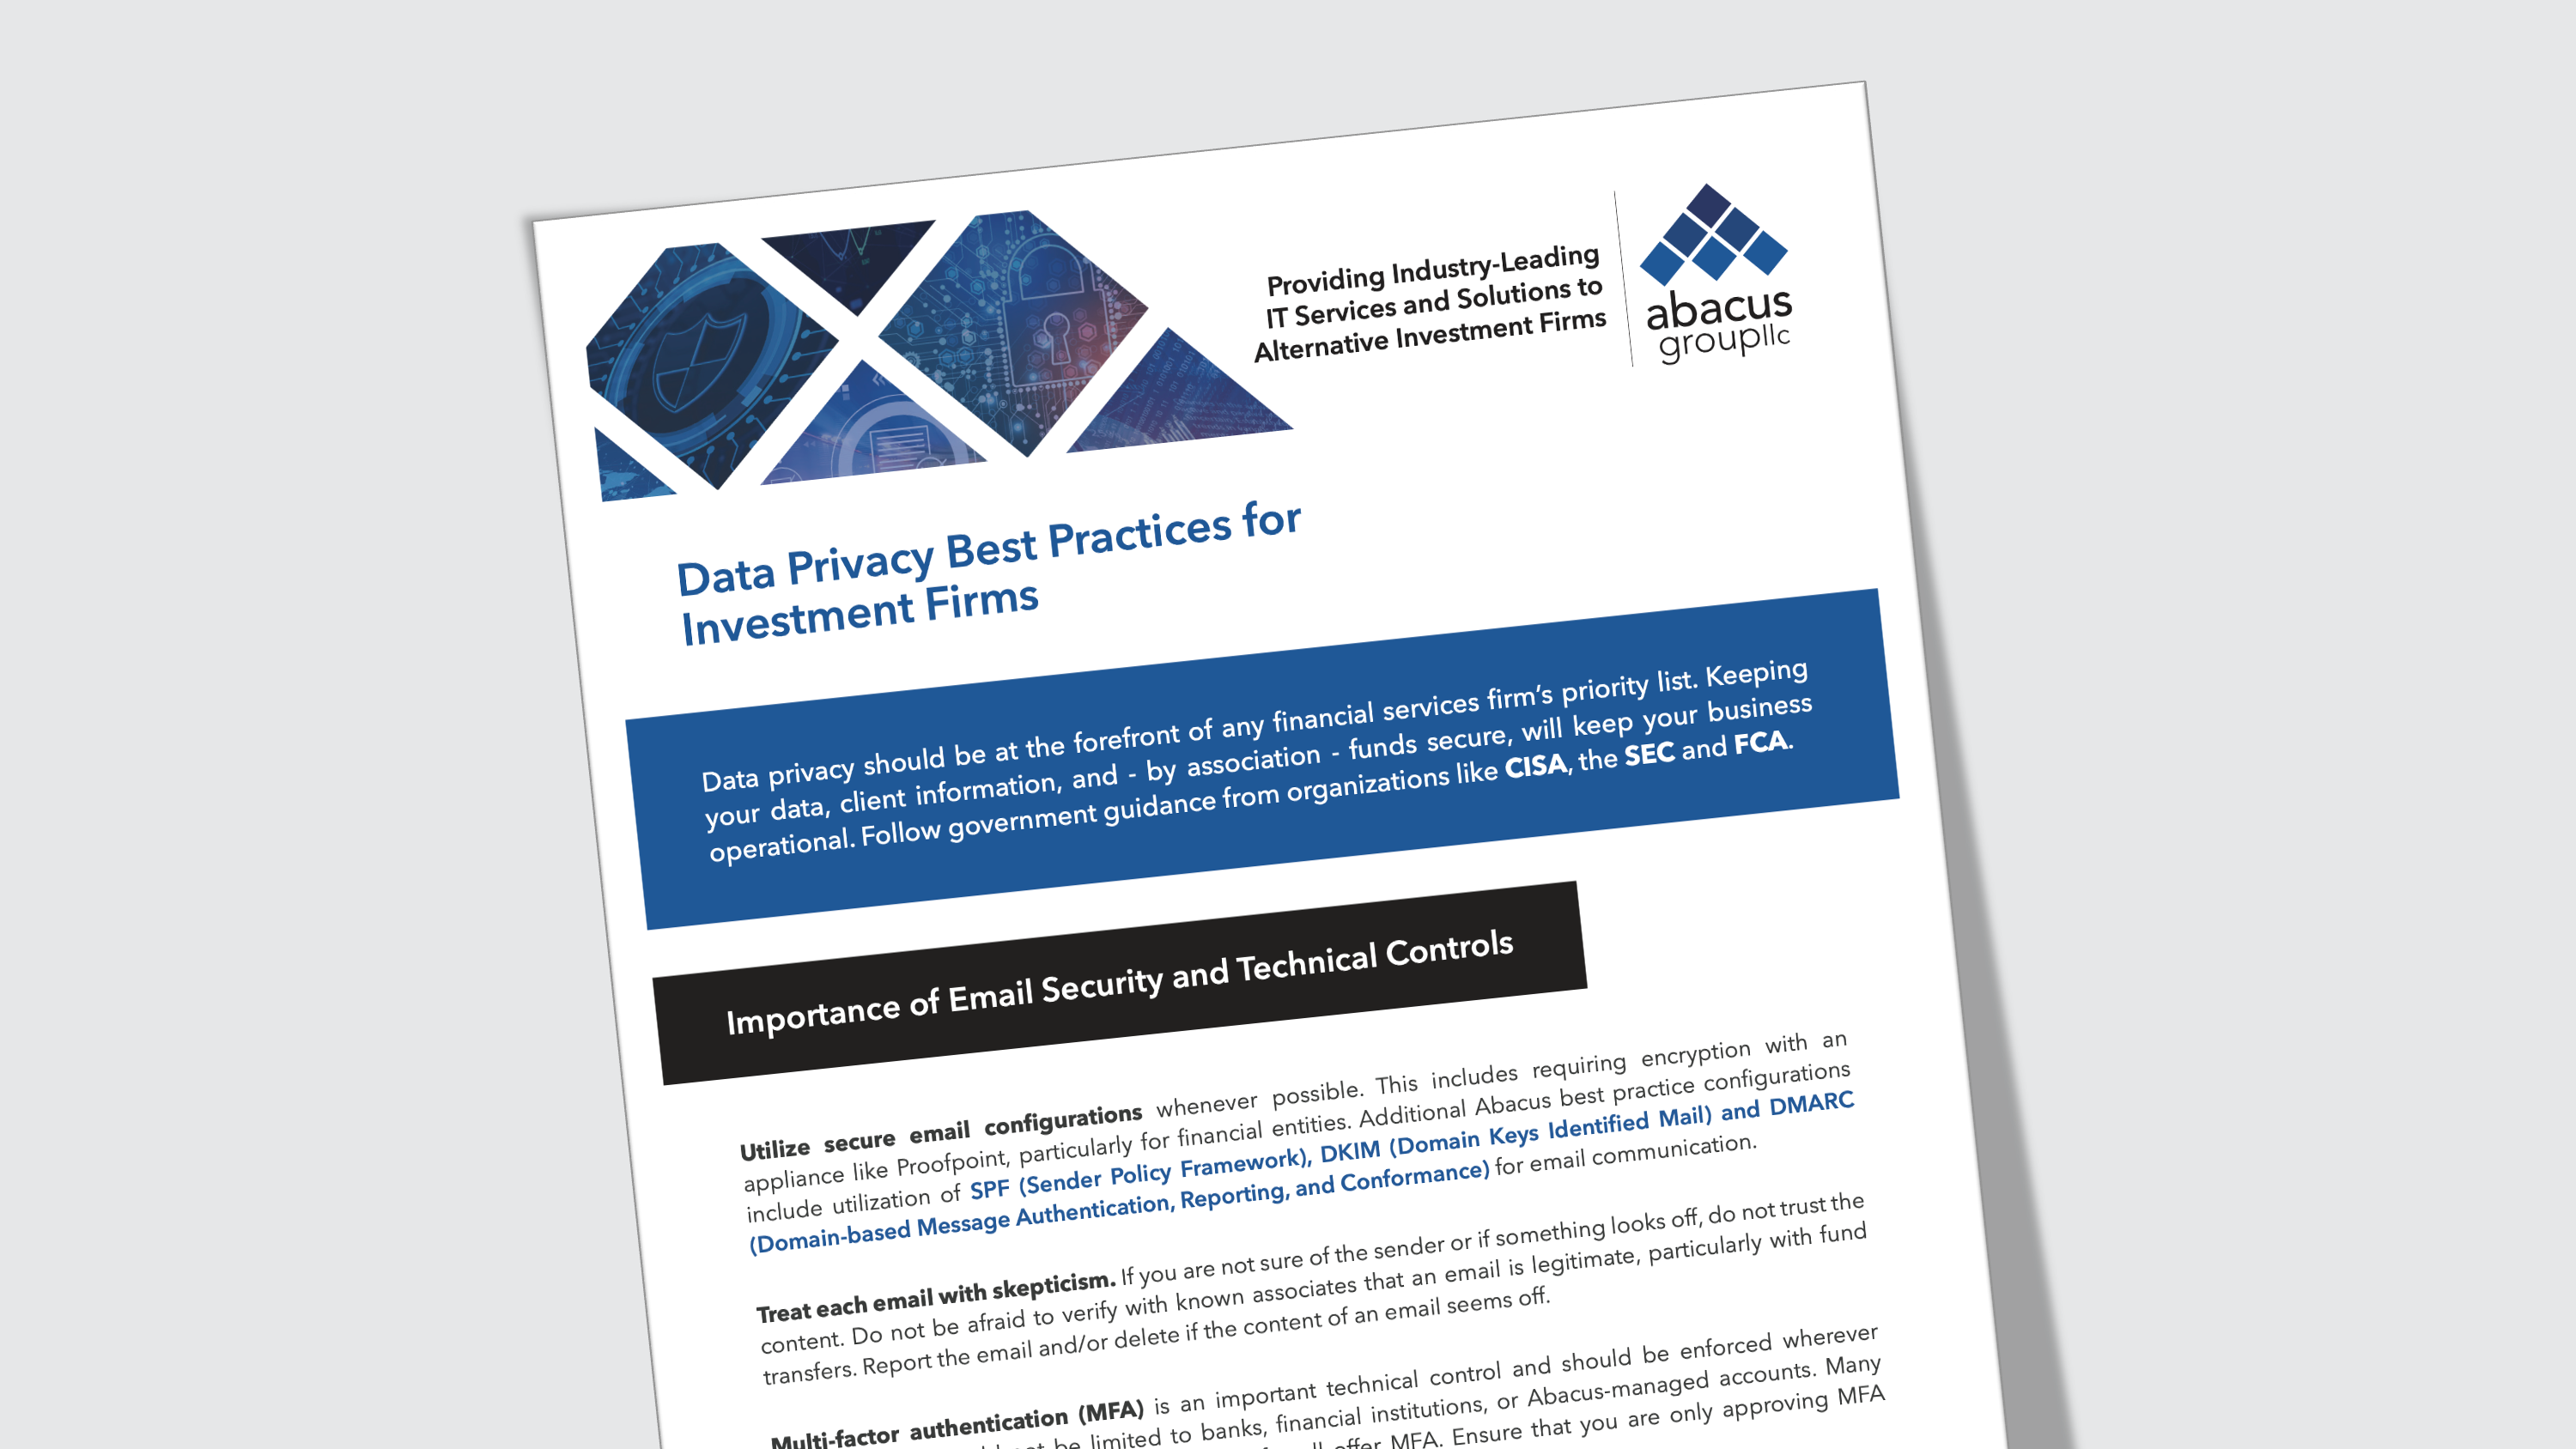 Preview Card - Data Privacy Best Practices